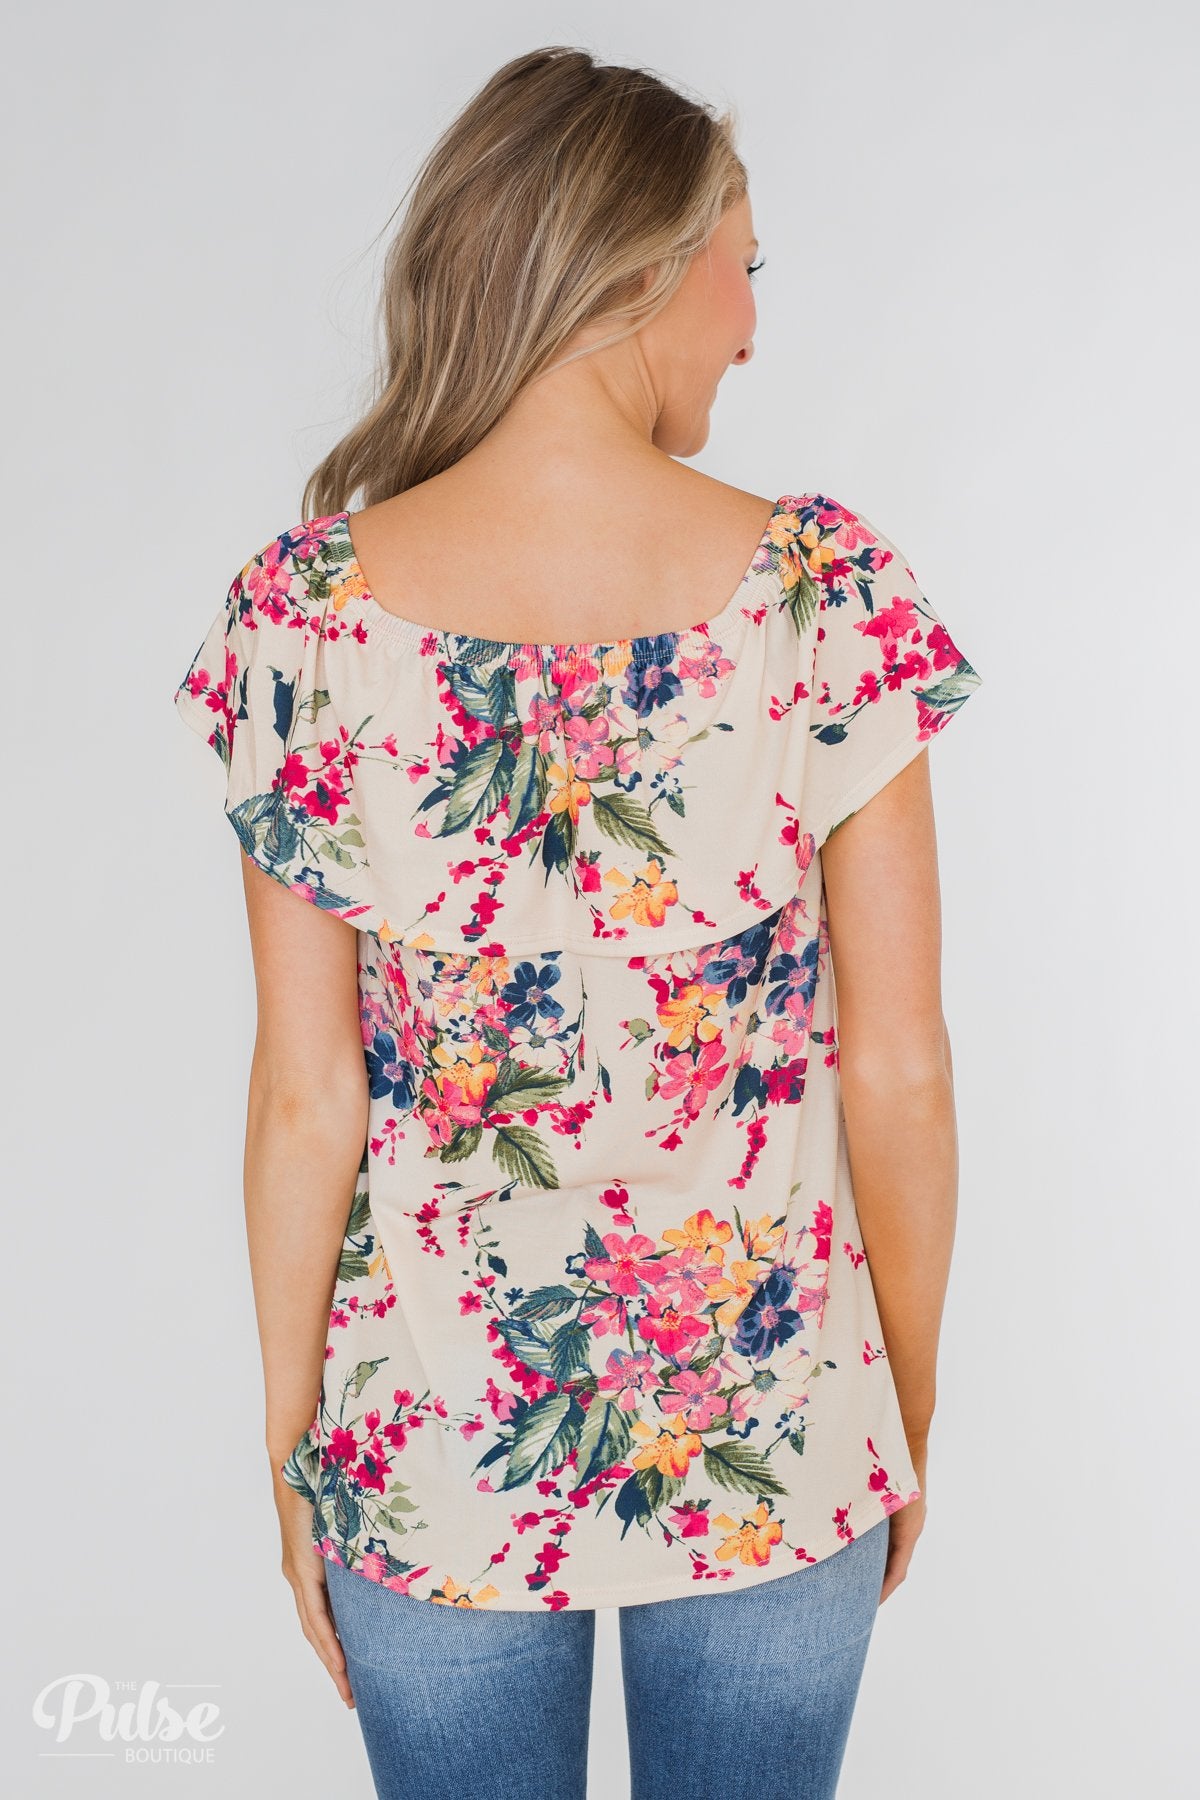 Grow With Me Off the Shoulder Floral Top - Beige